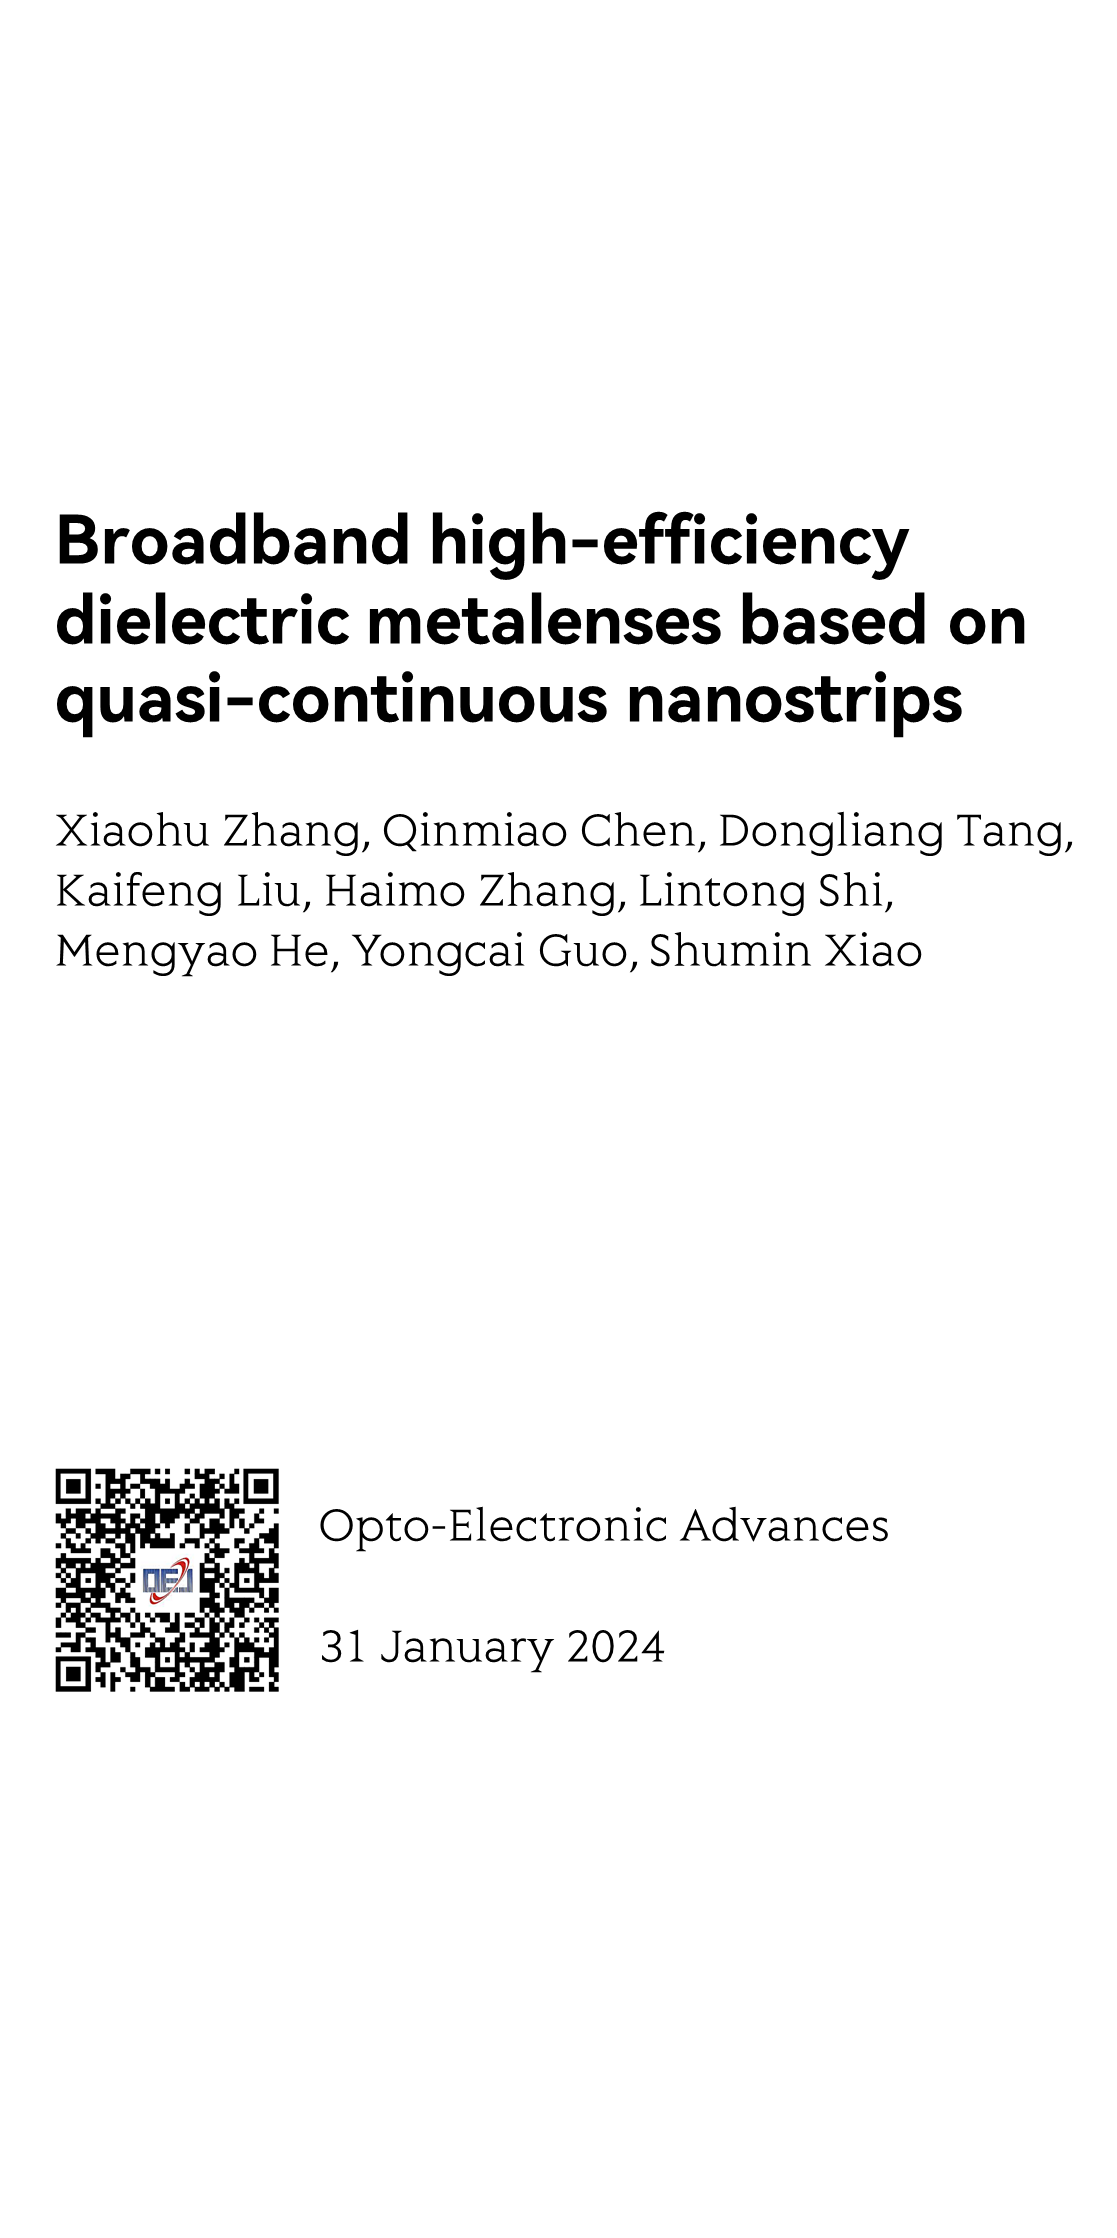 Broadband high-efficiency dielectric metalenses based on quasi-continuous nanostrips_1